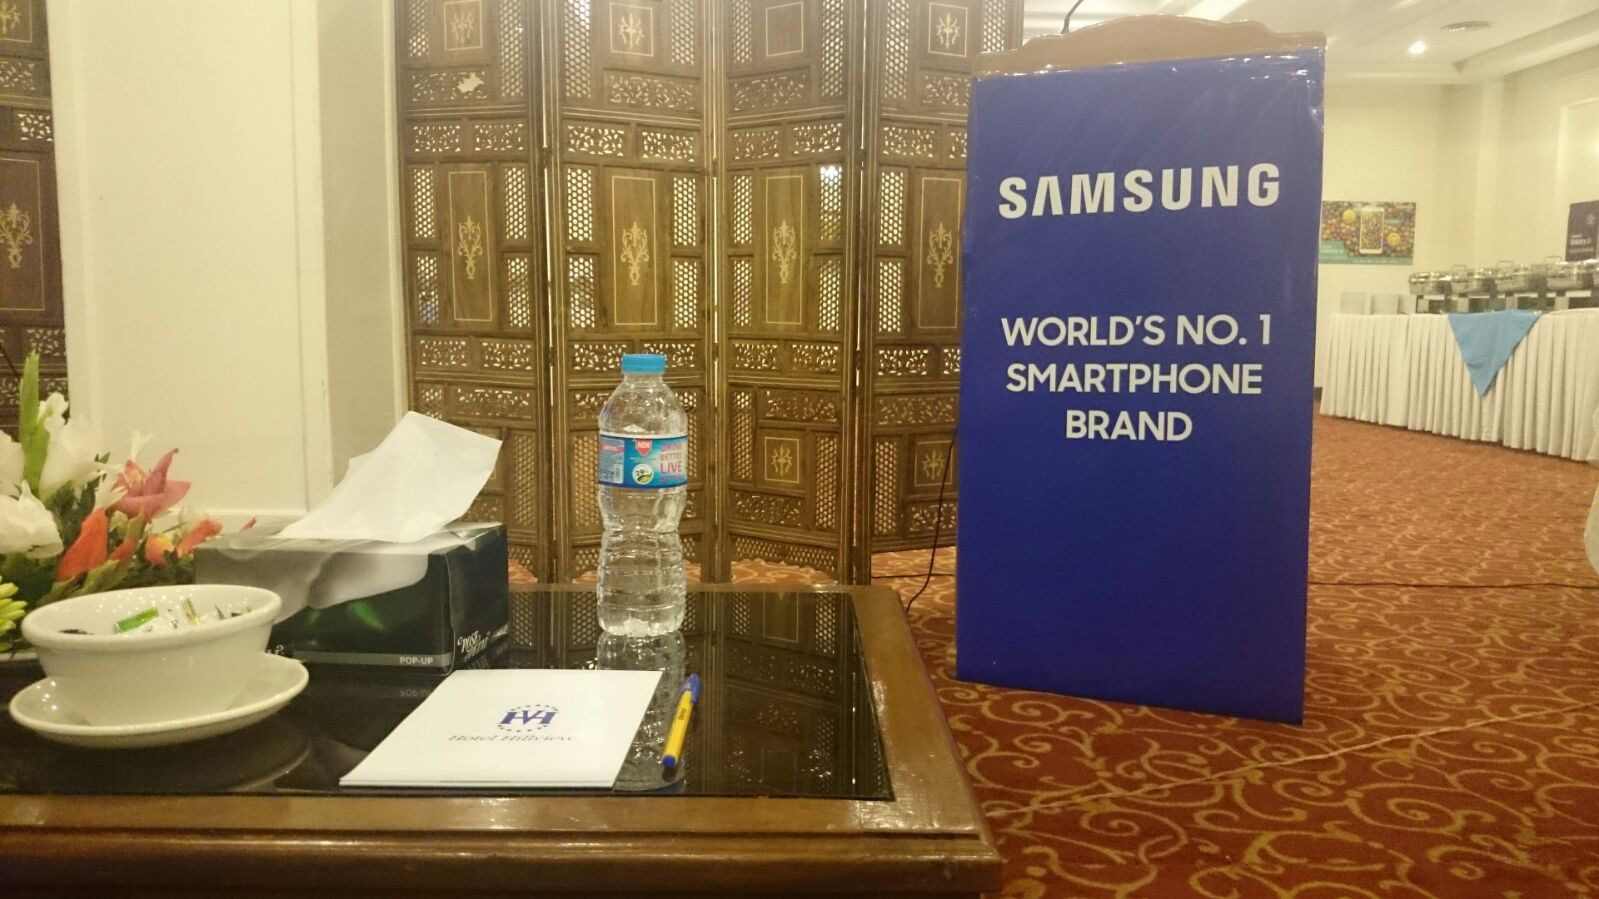 Samsung Organizes Pre-Launch Event of Galaxy S6 Edge+ and Note 5